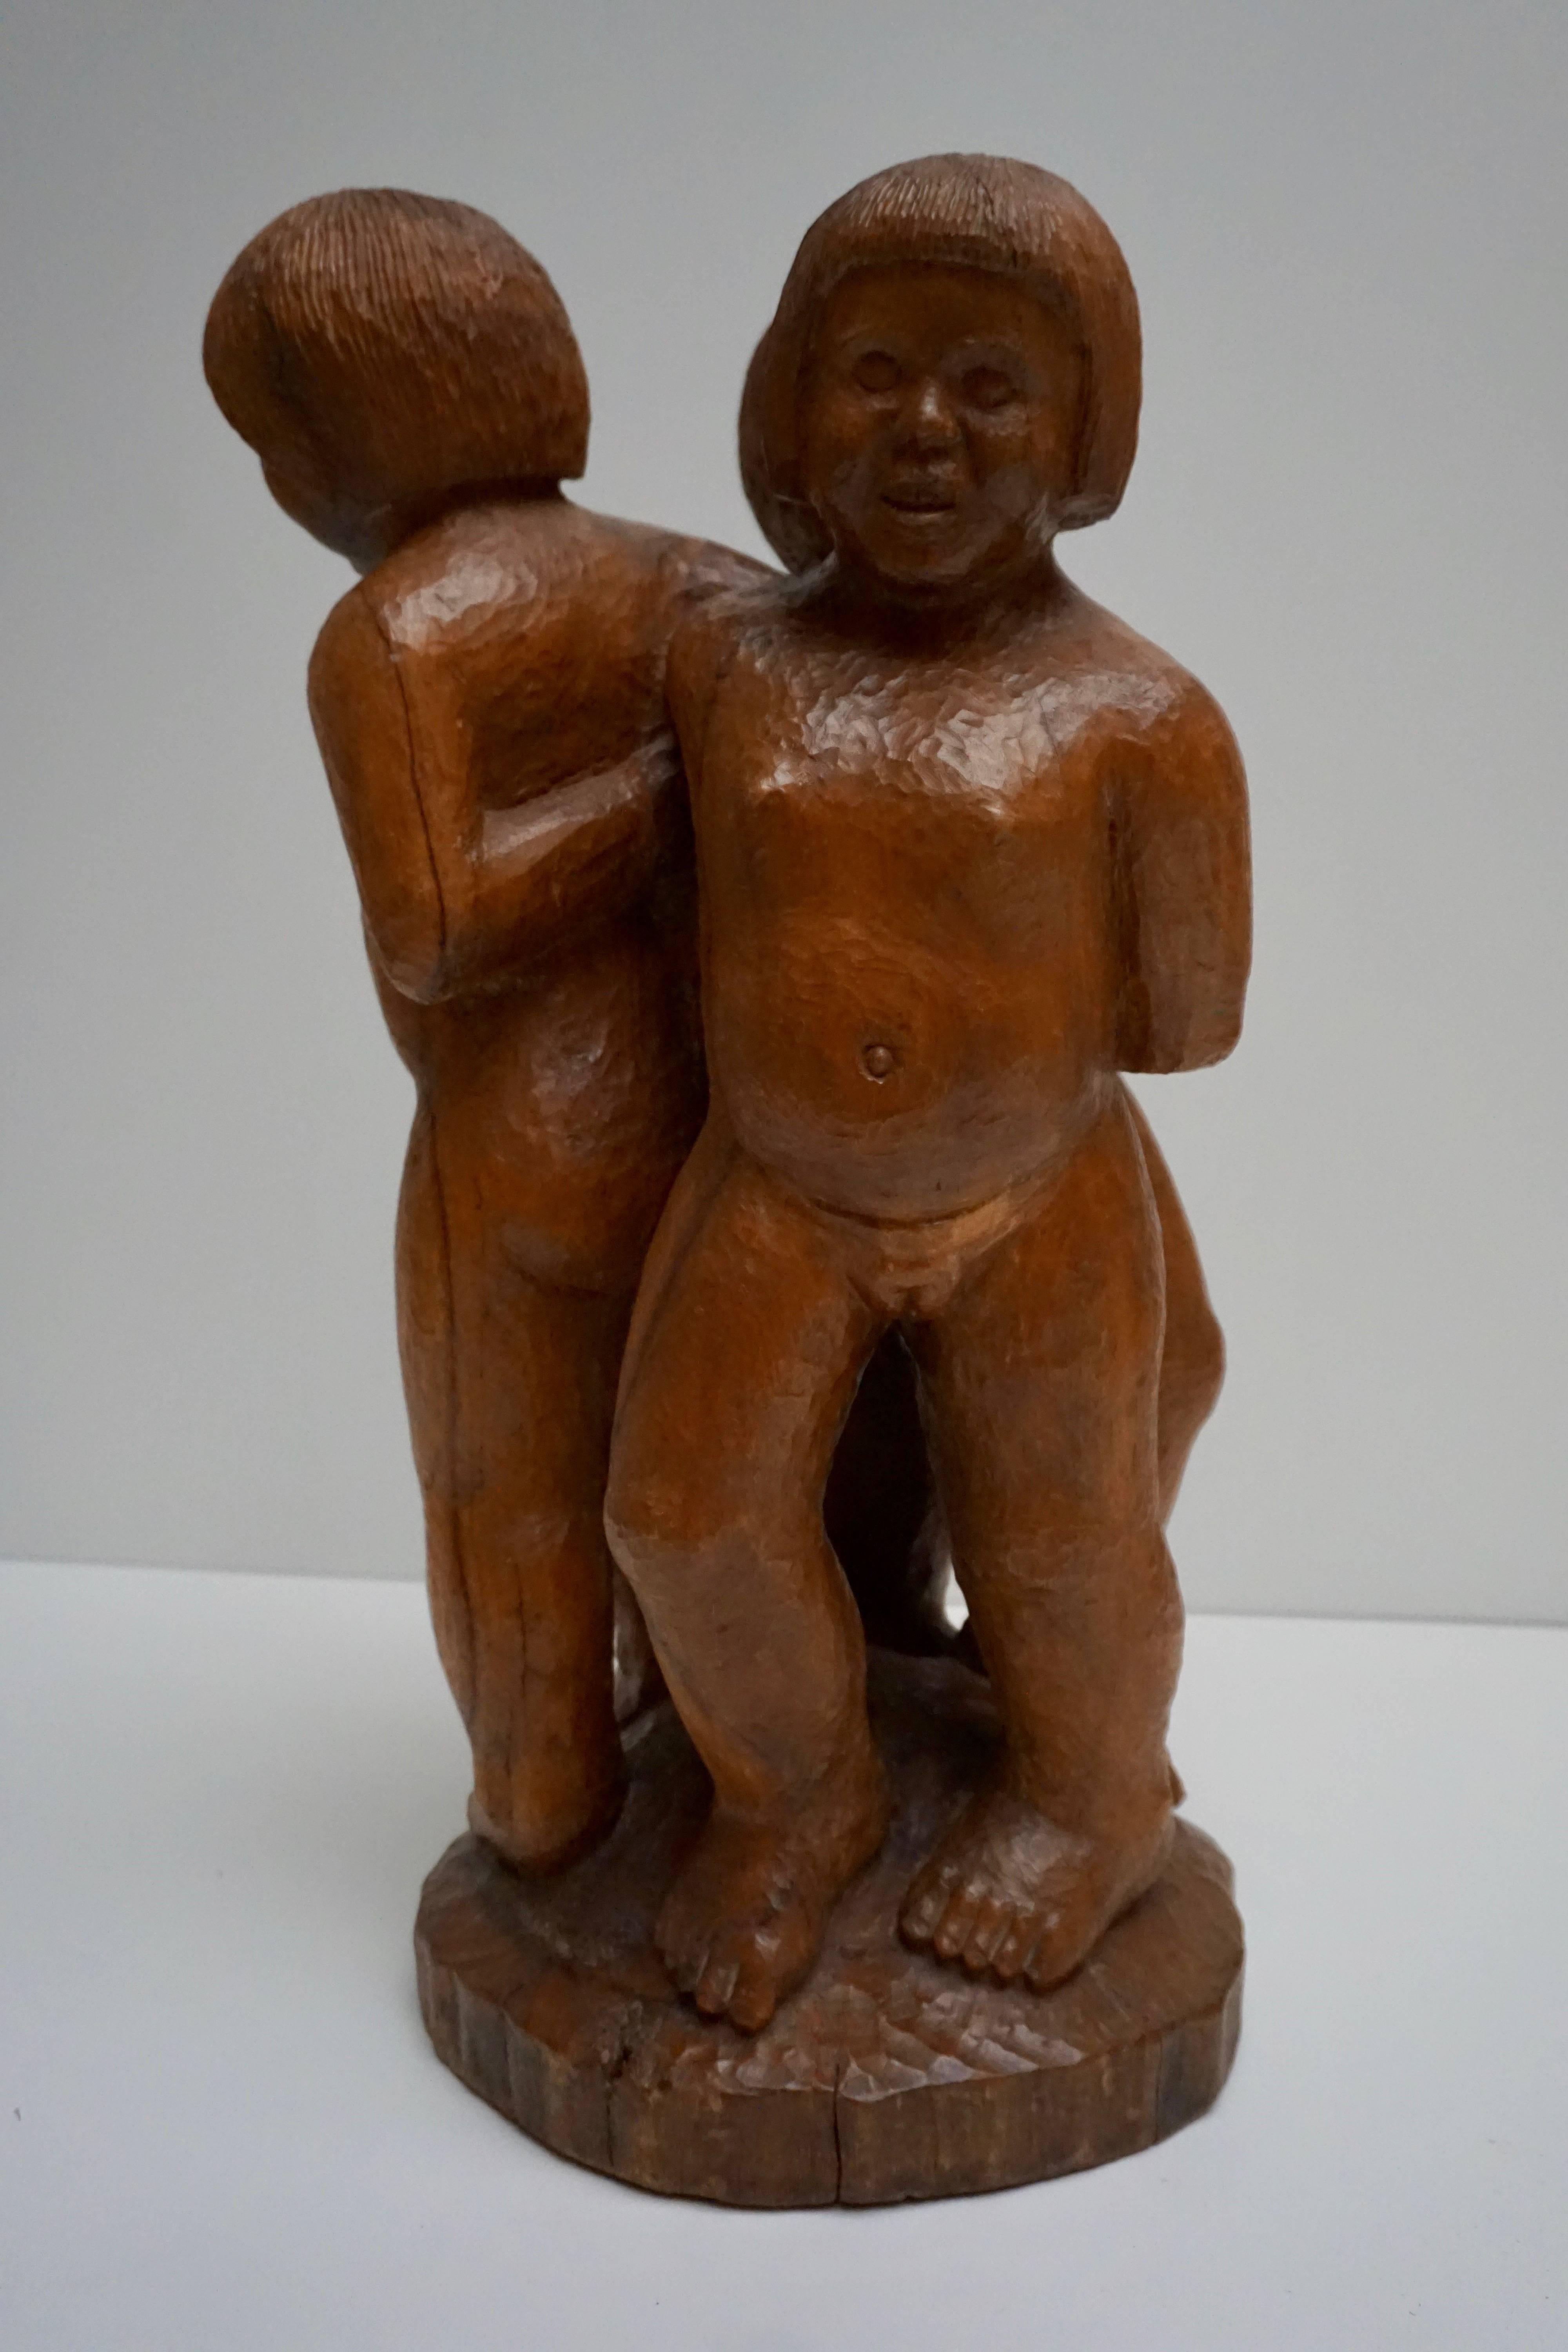 Belgian Sculpture in Wood of Three Young Nudes